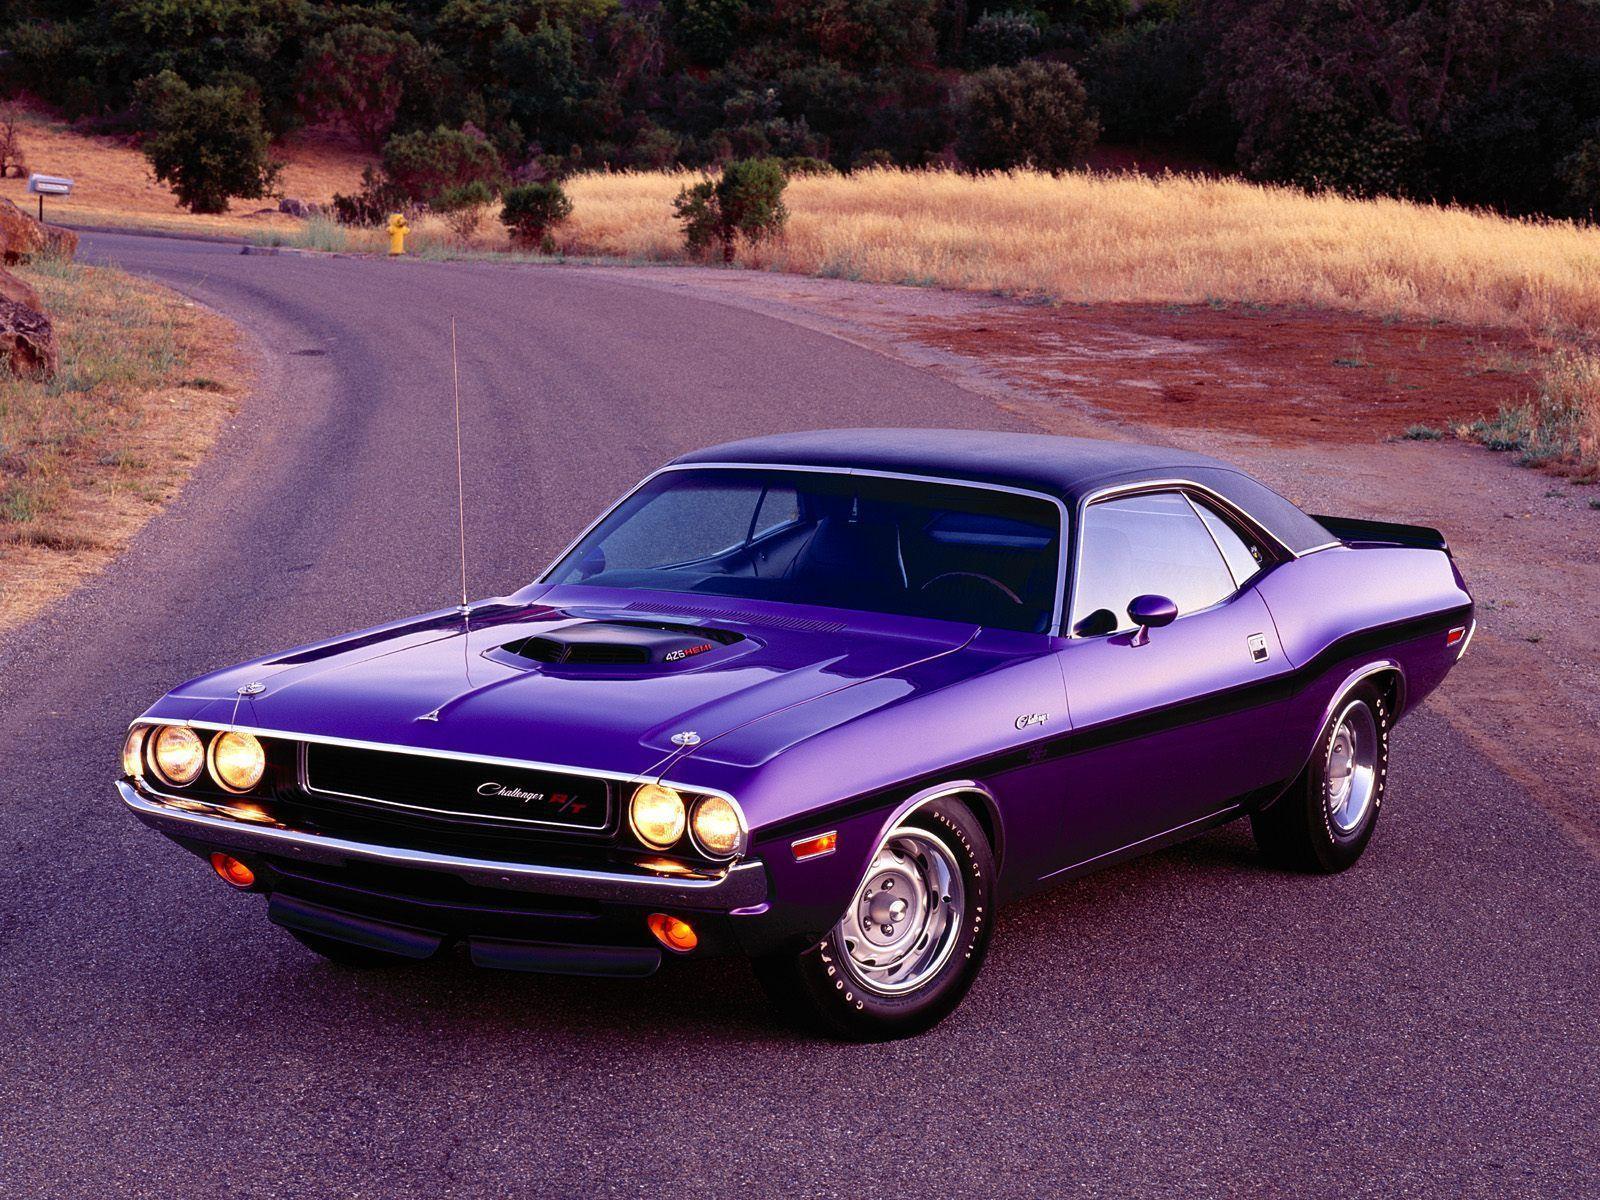 Dodge Challenger Picture and Wallpaper